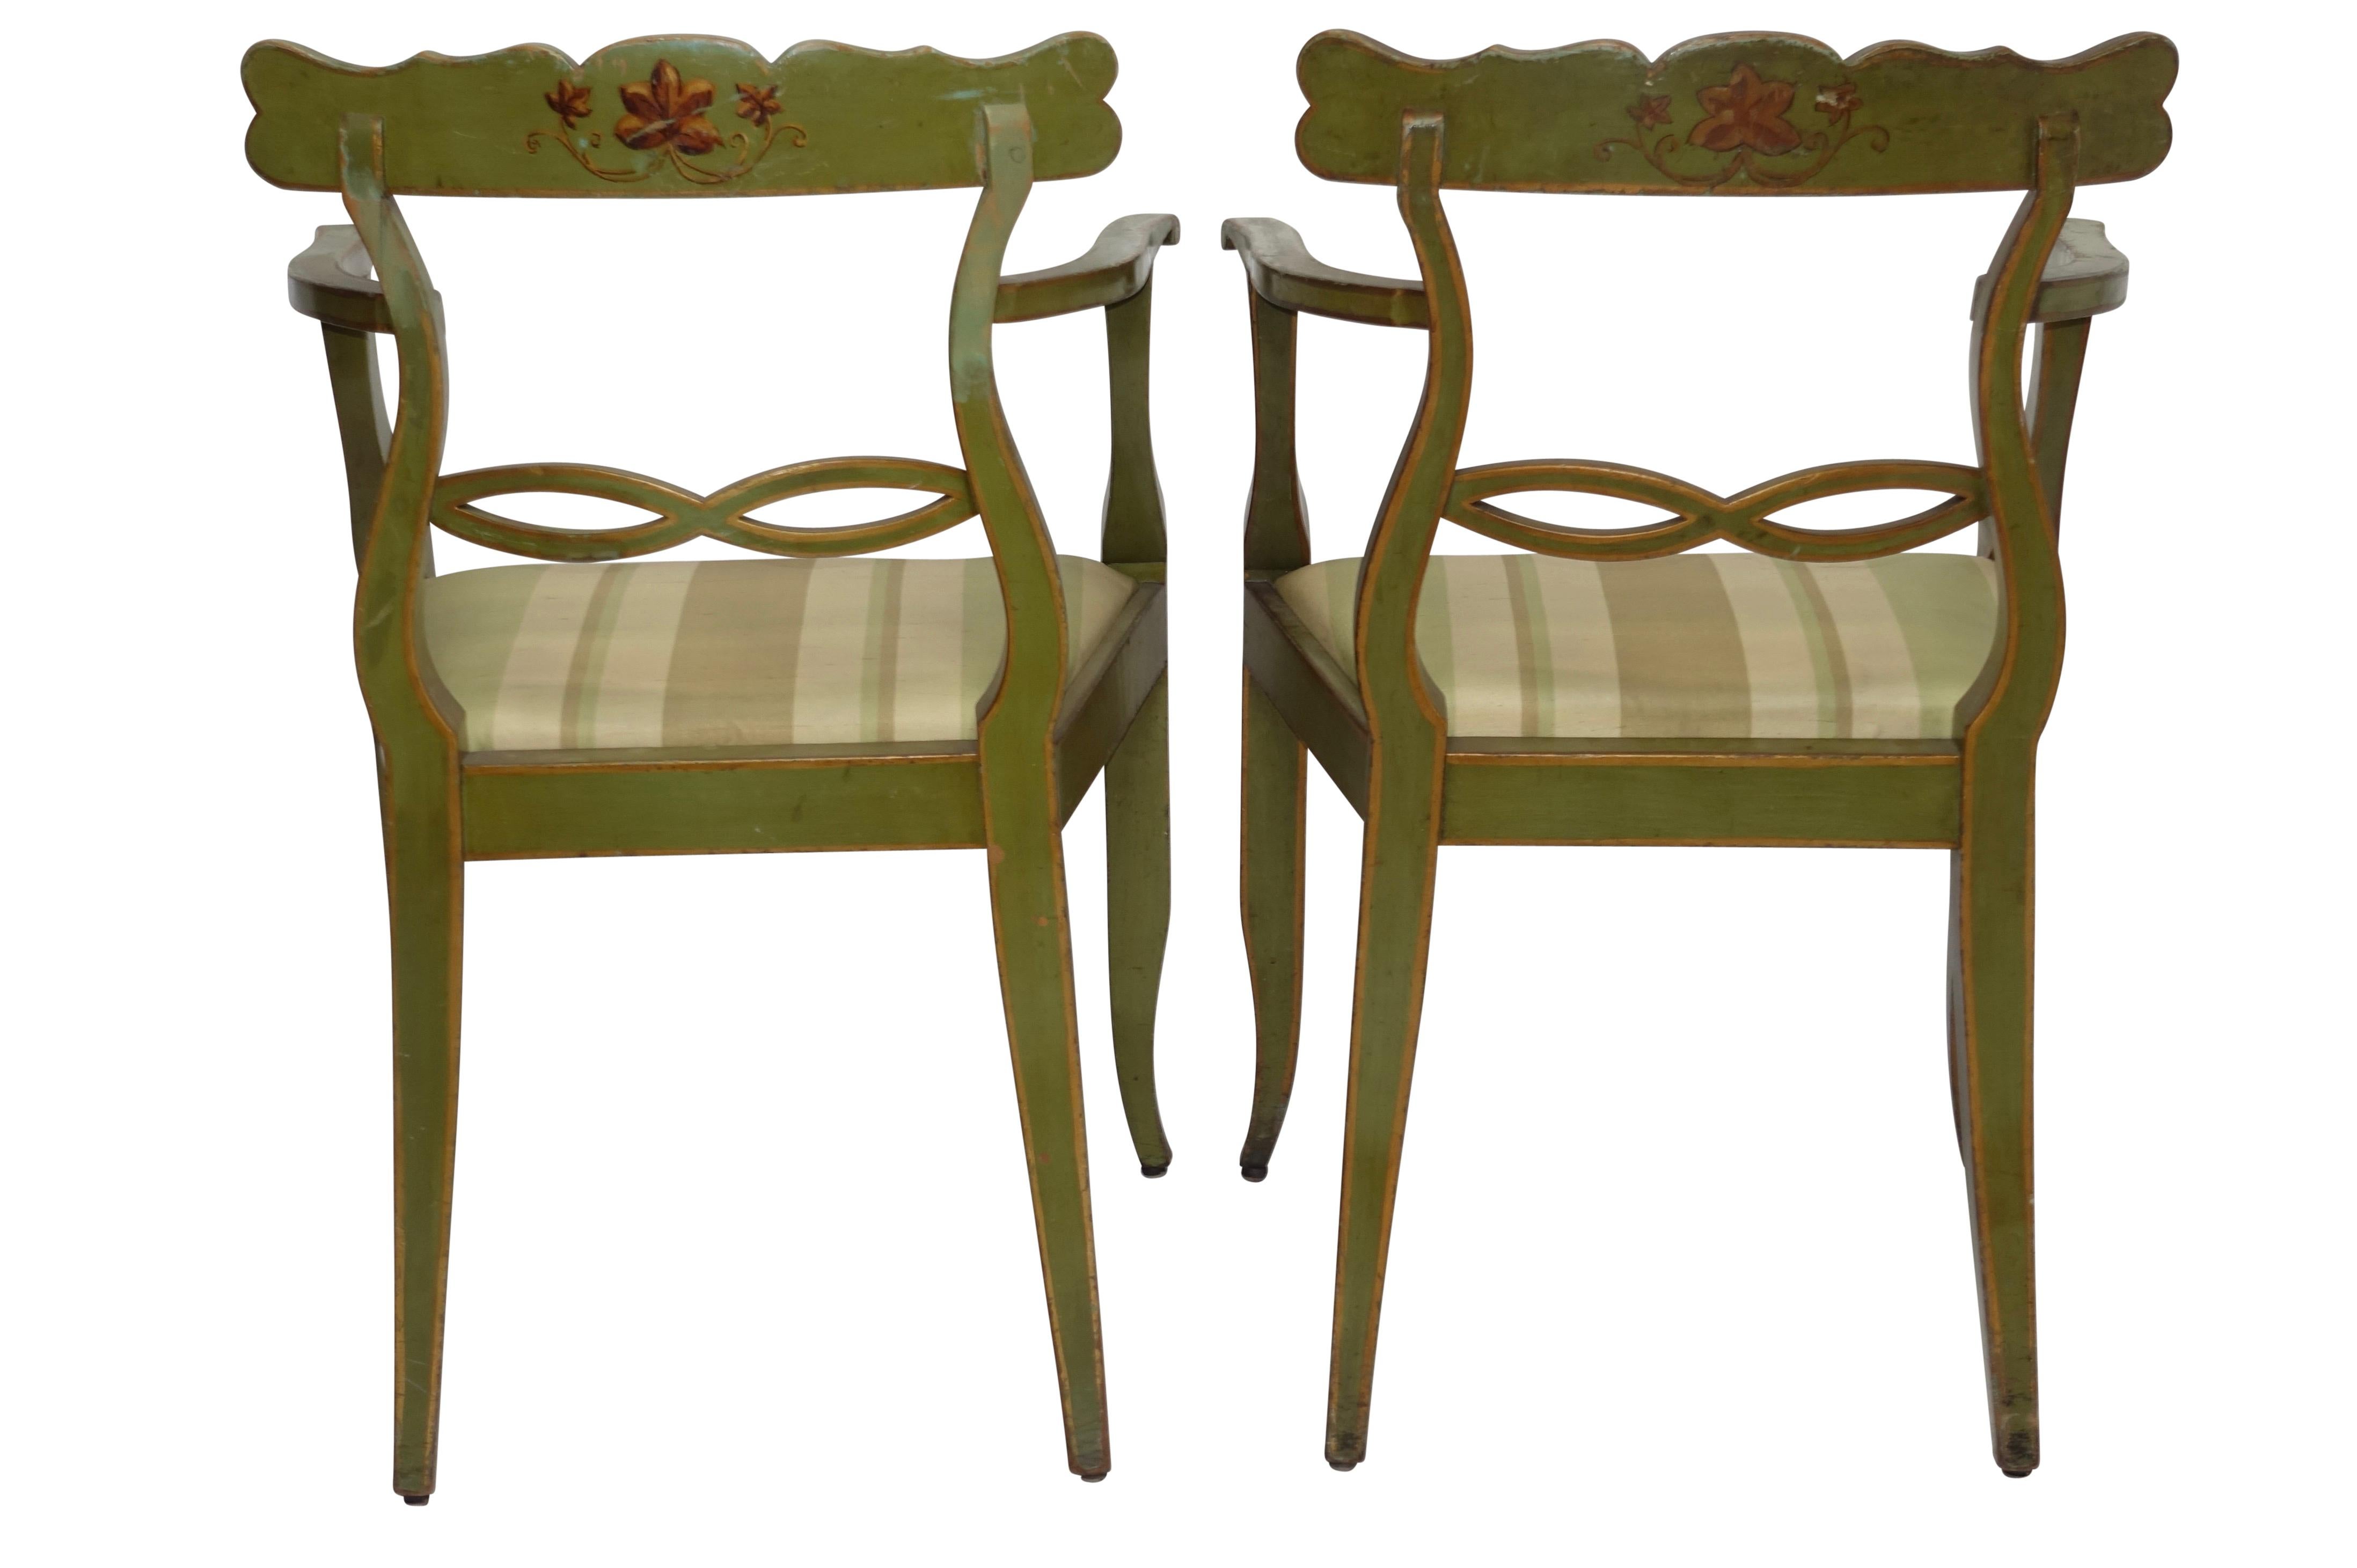 Four Green Painted Armchairs with Trailing Ivy, Northern European, 19th Century For Sale 7